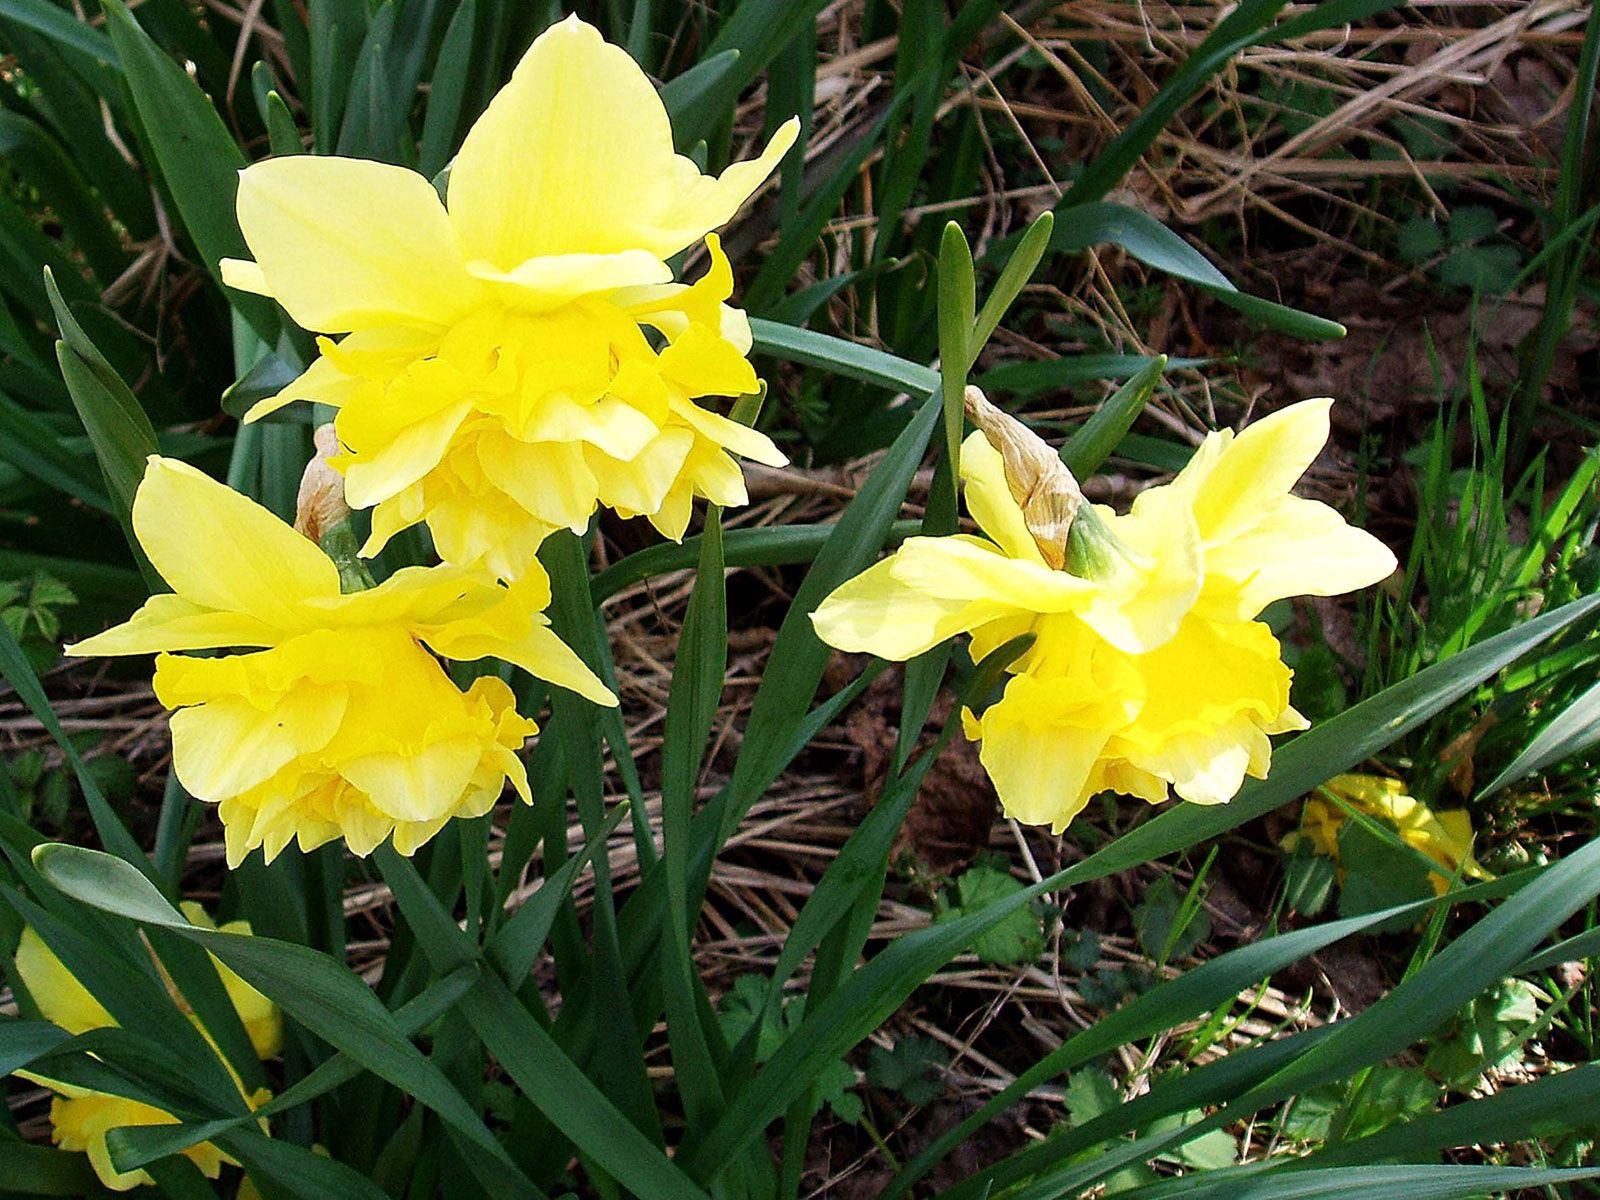 flowers, narcissussi, yellow, greens, spring Image for desktop